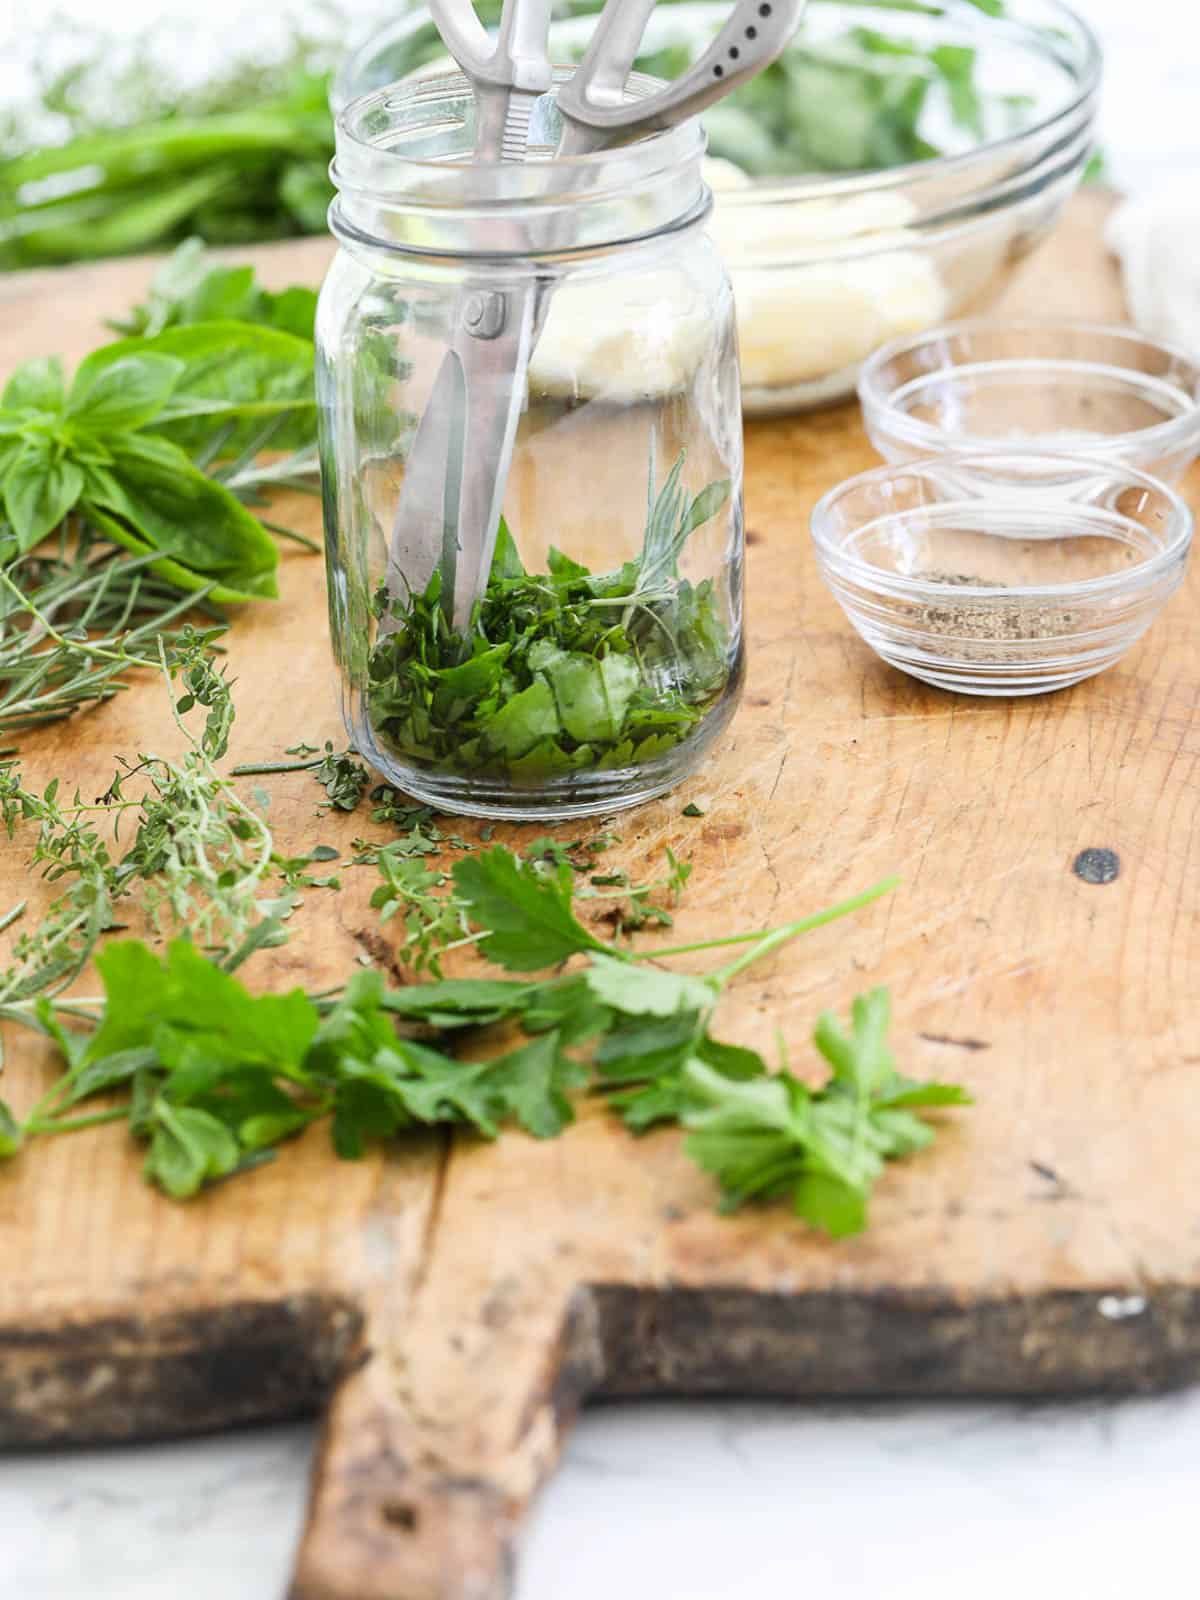 https://www.delicioustable.com/wp-content/uploads/2023/05/Making-Herb-Butter-cutting-herbs.jpg